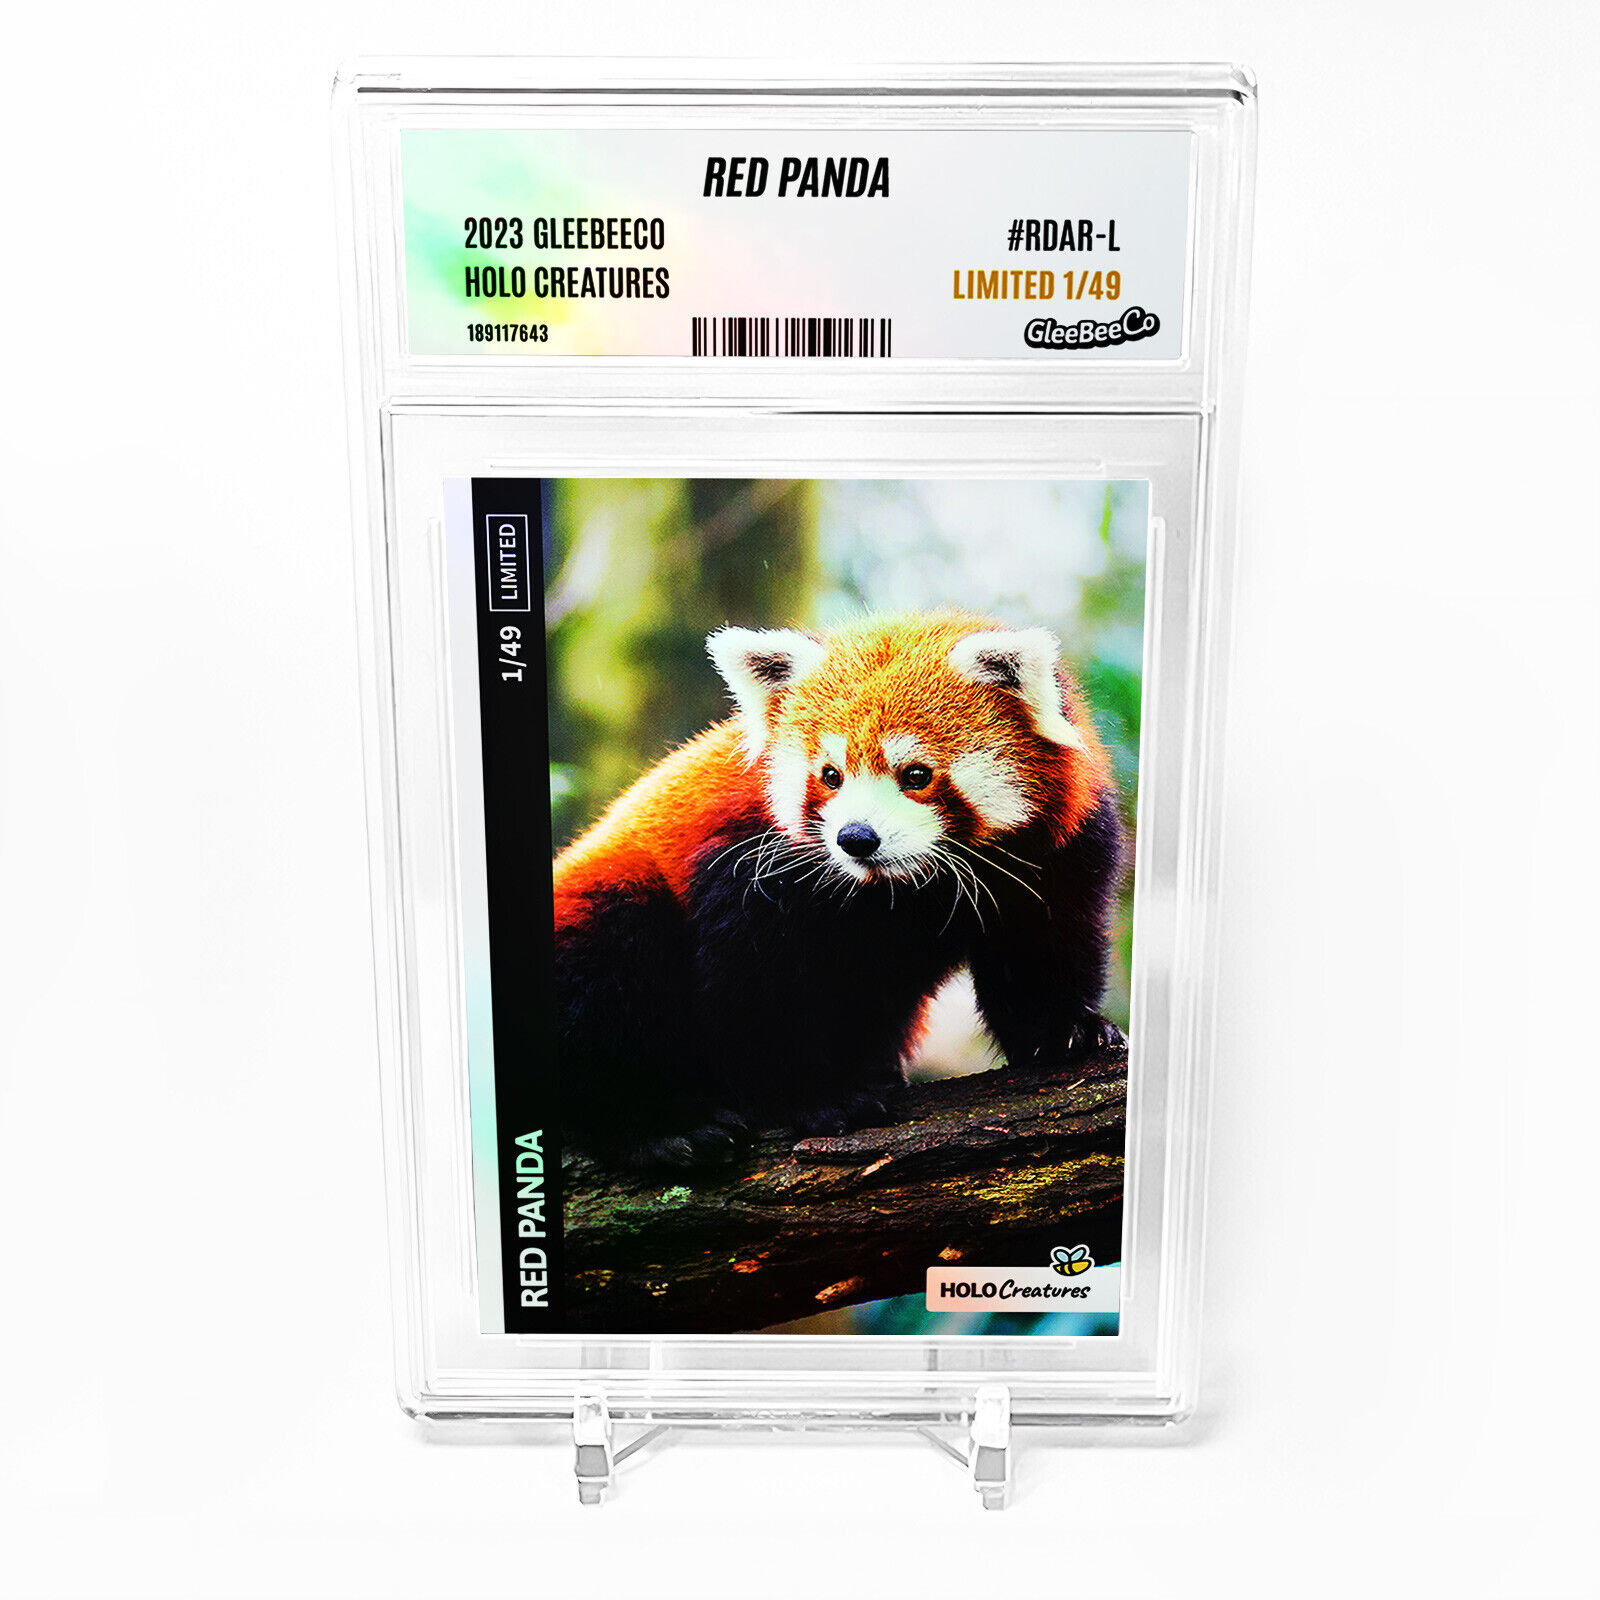 RED PANDA Photo Card 2023 GleeBeeCo Holo Creatures Slabbed #RDAR-L Only /49